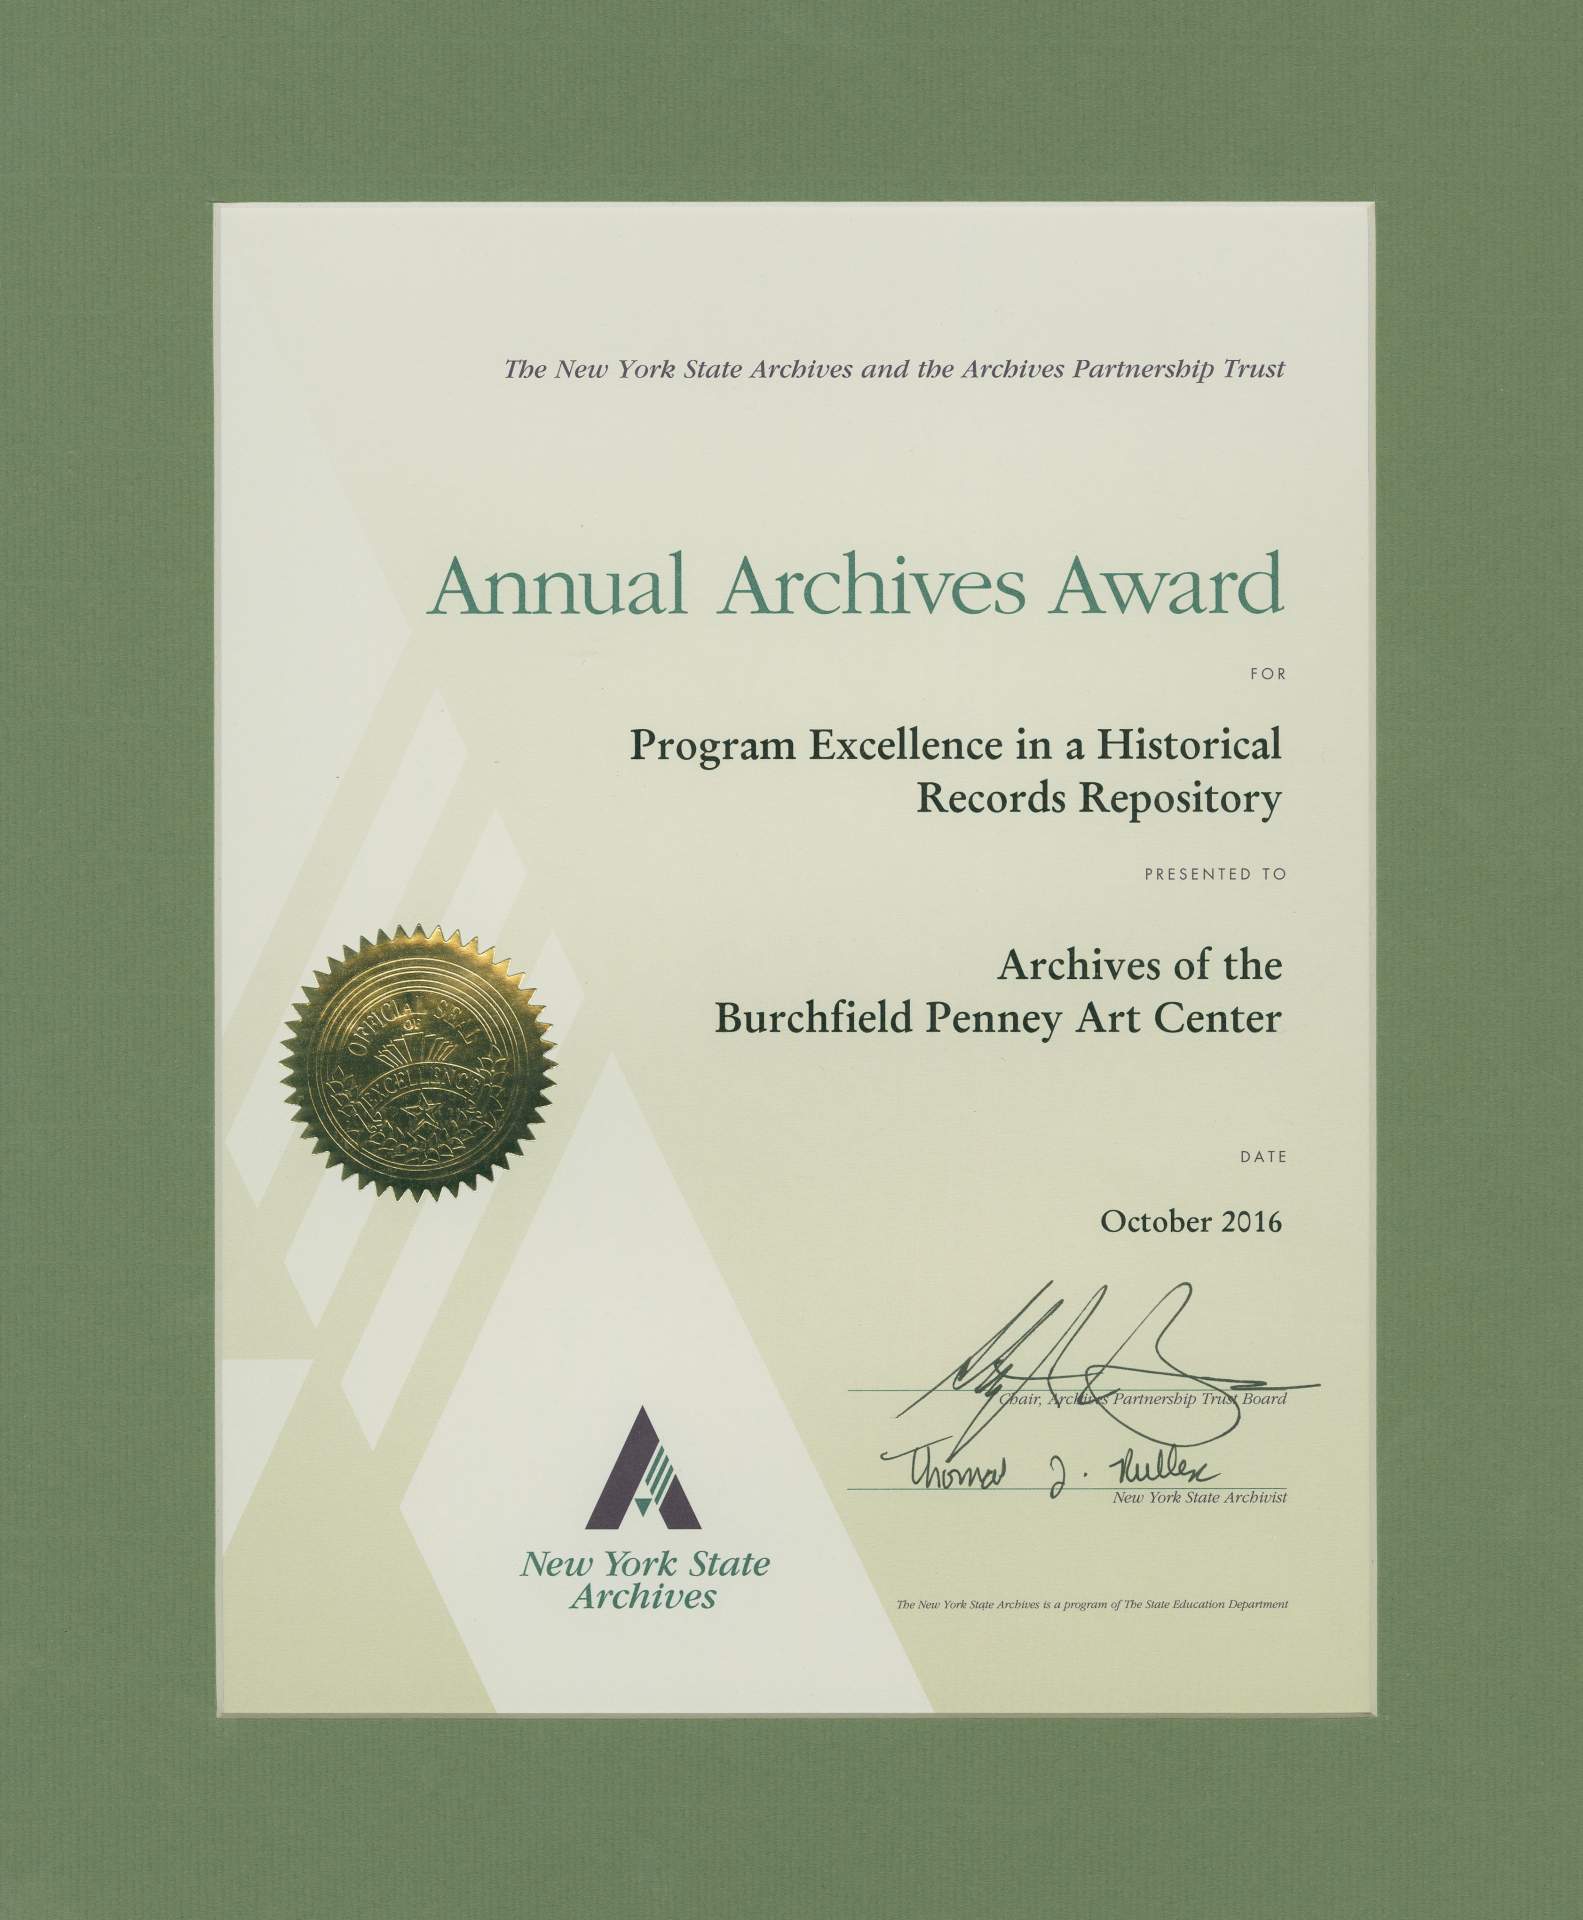 Archives of the Burchfield Penney Art Center Wins State Archives Award